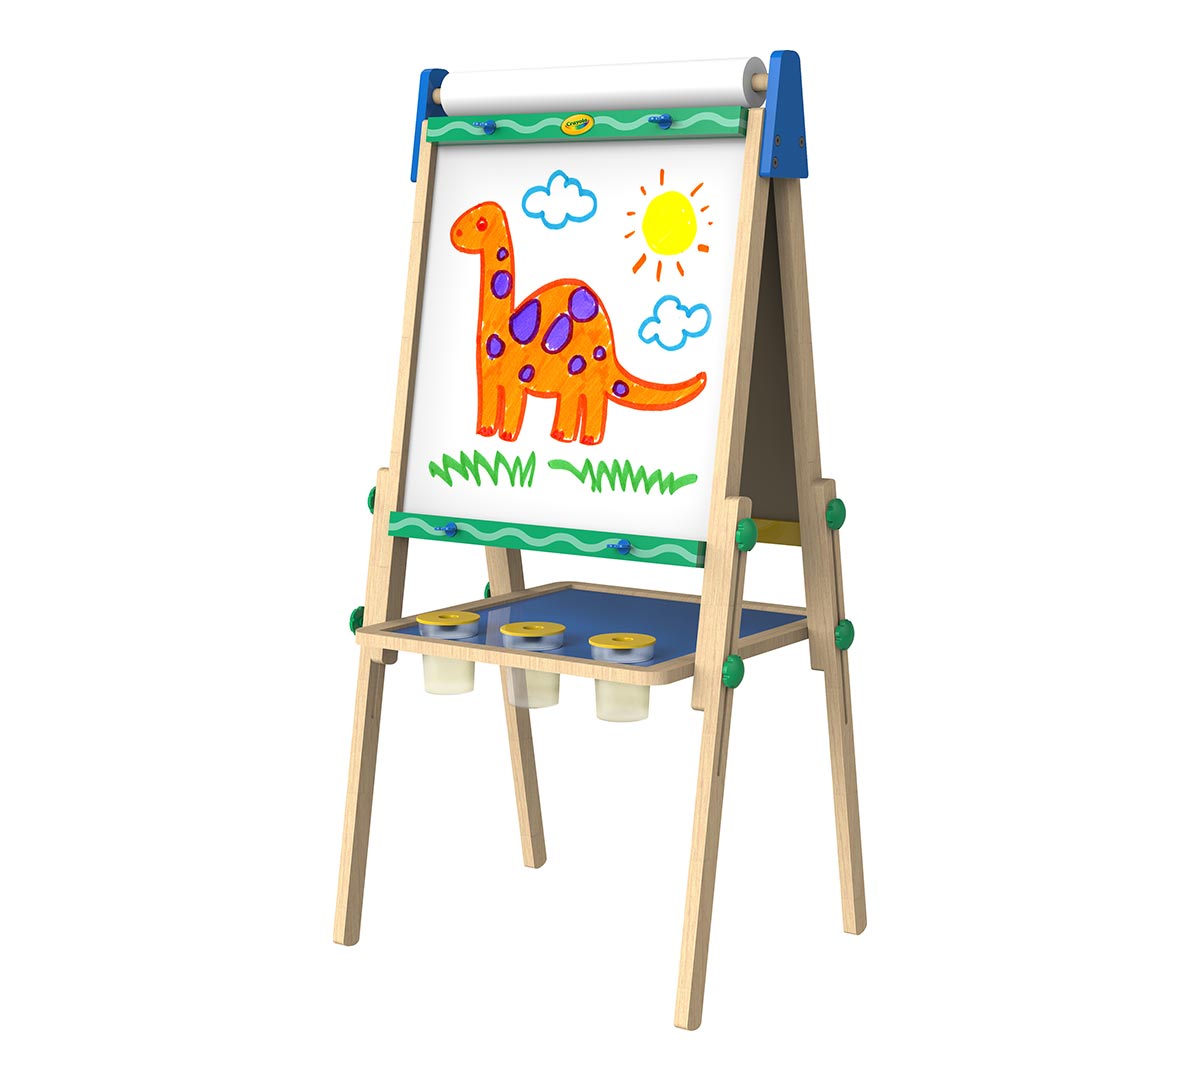 Crayola 2 Sided Easel Drawing Board Art Craft Childrens Play Room Painting Gift 